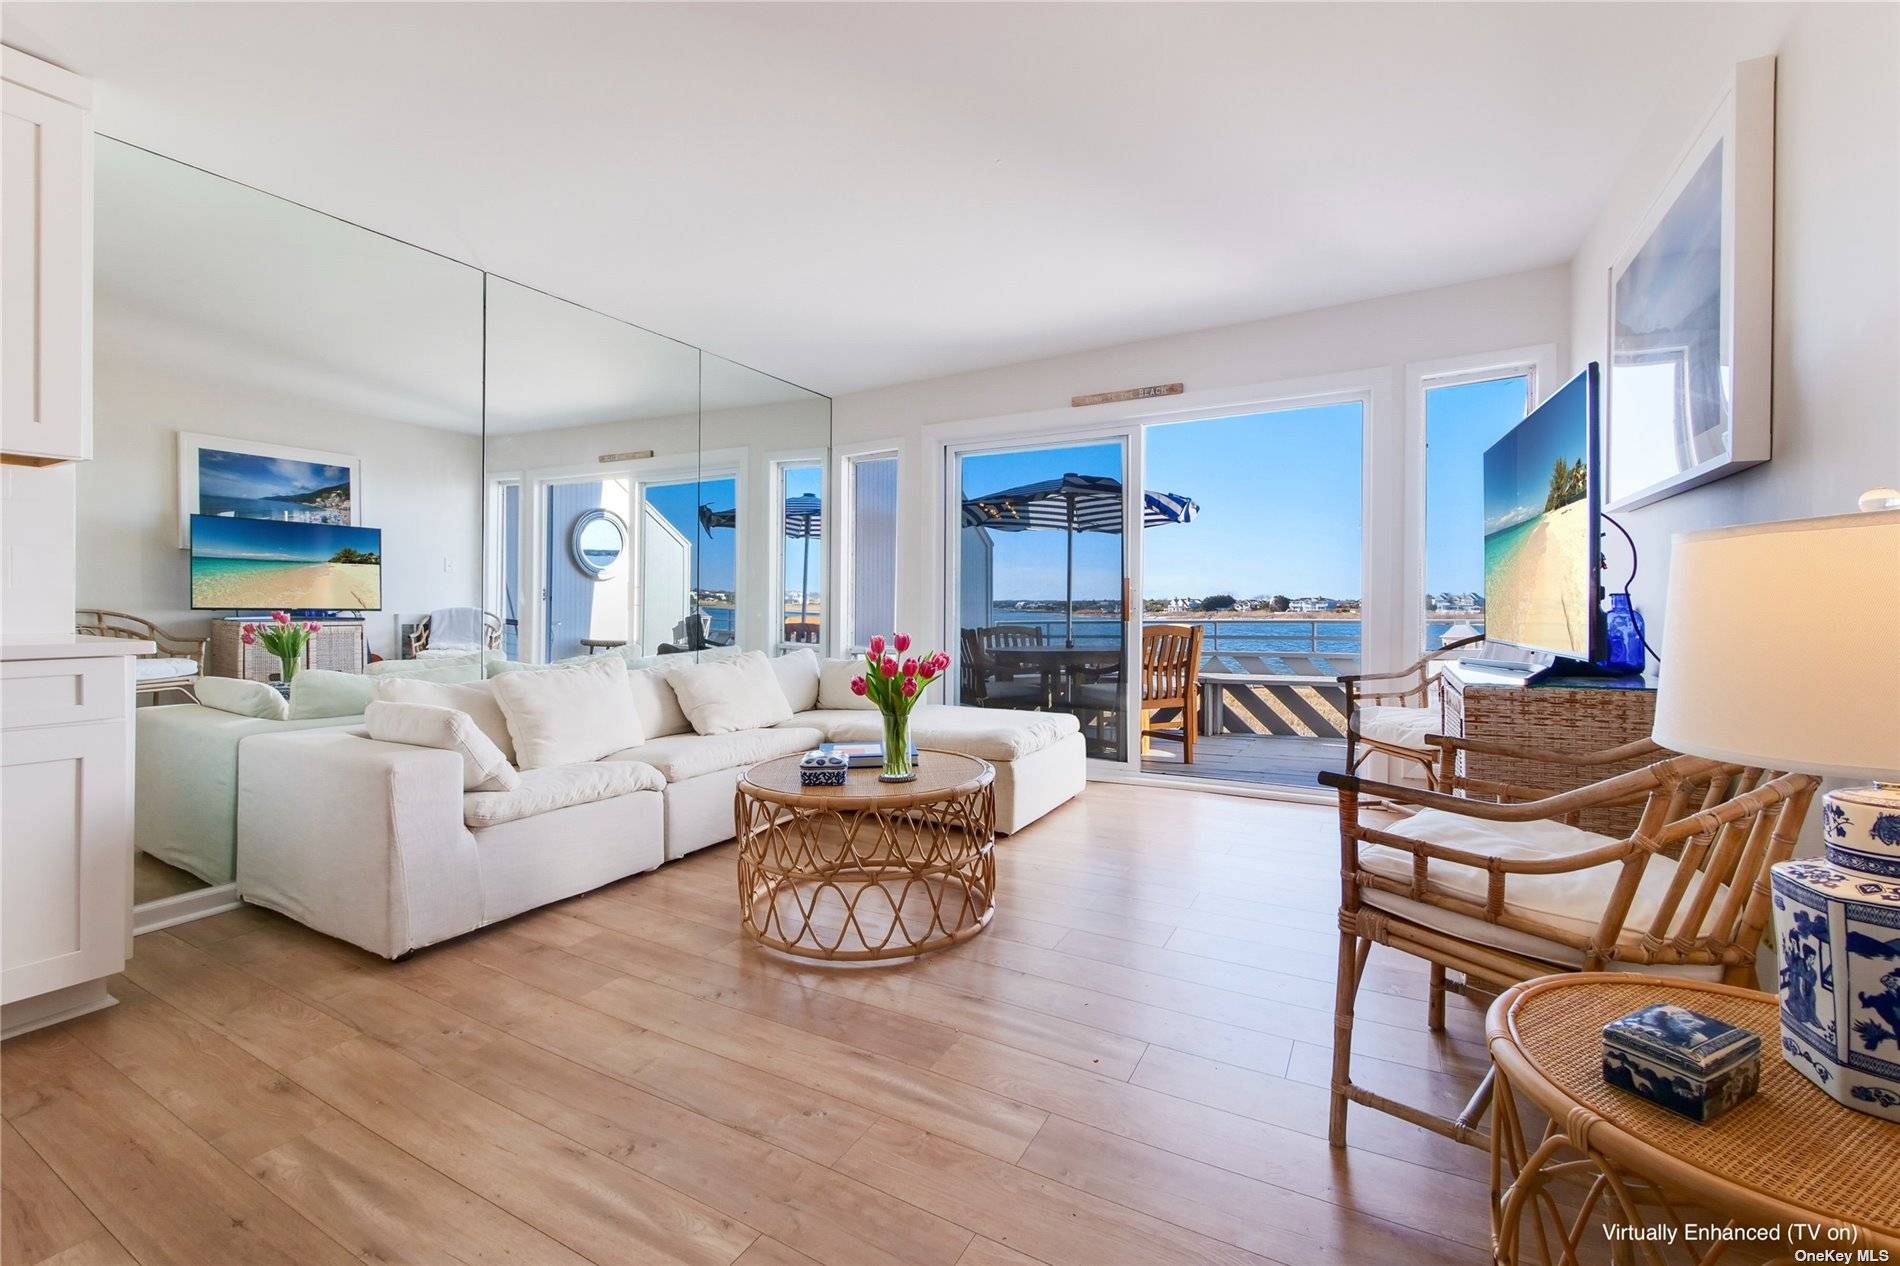 Located in the Bay Mor Club community on Dune Road, this 2nd level, 1 bed 1 full bath condo features the most exquisite bay views and breathtaking sunsets.